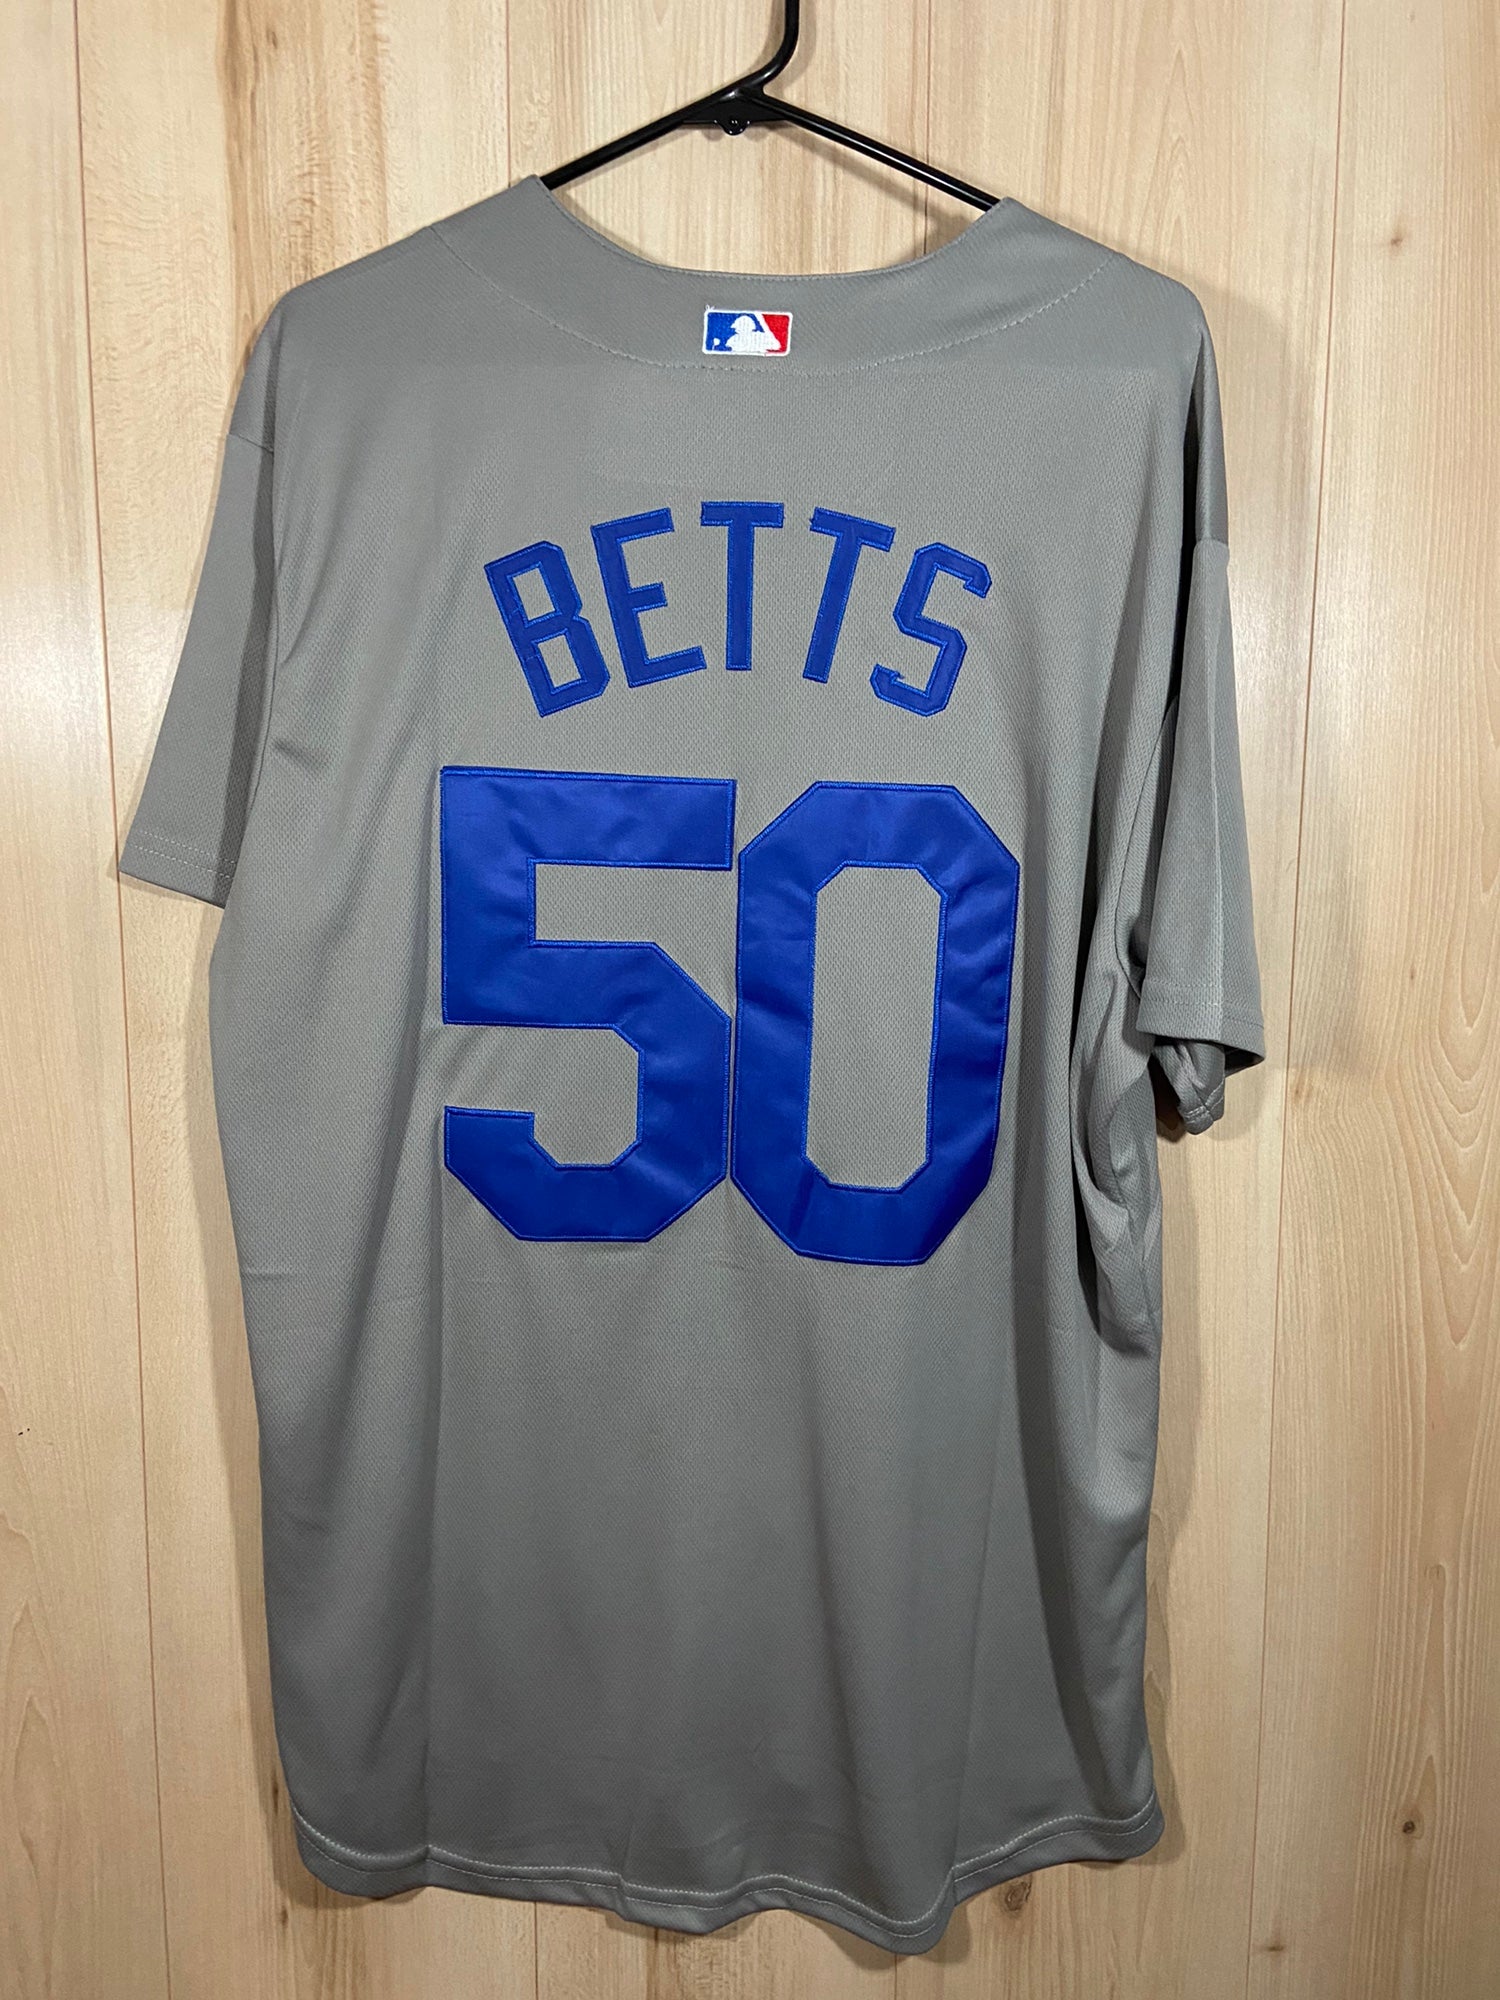 Mookie Betts Adult Large Jersey